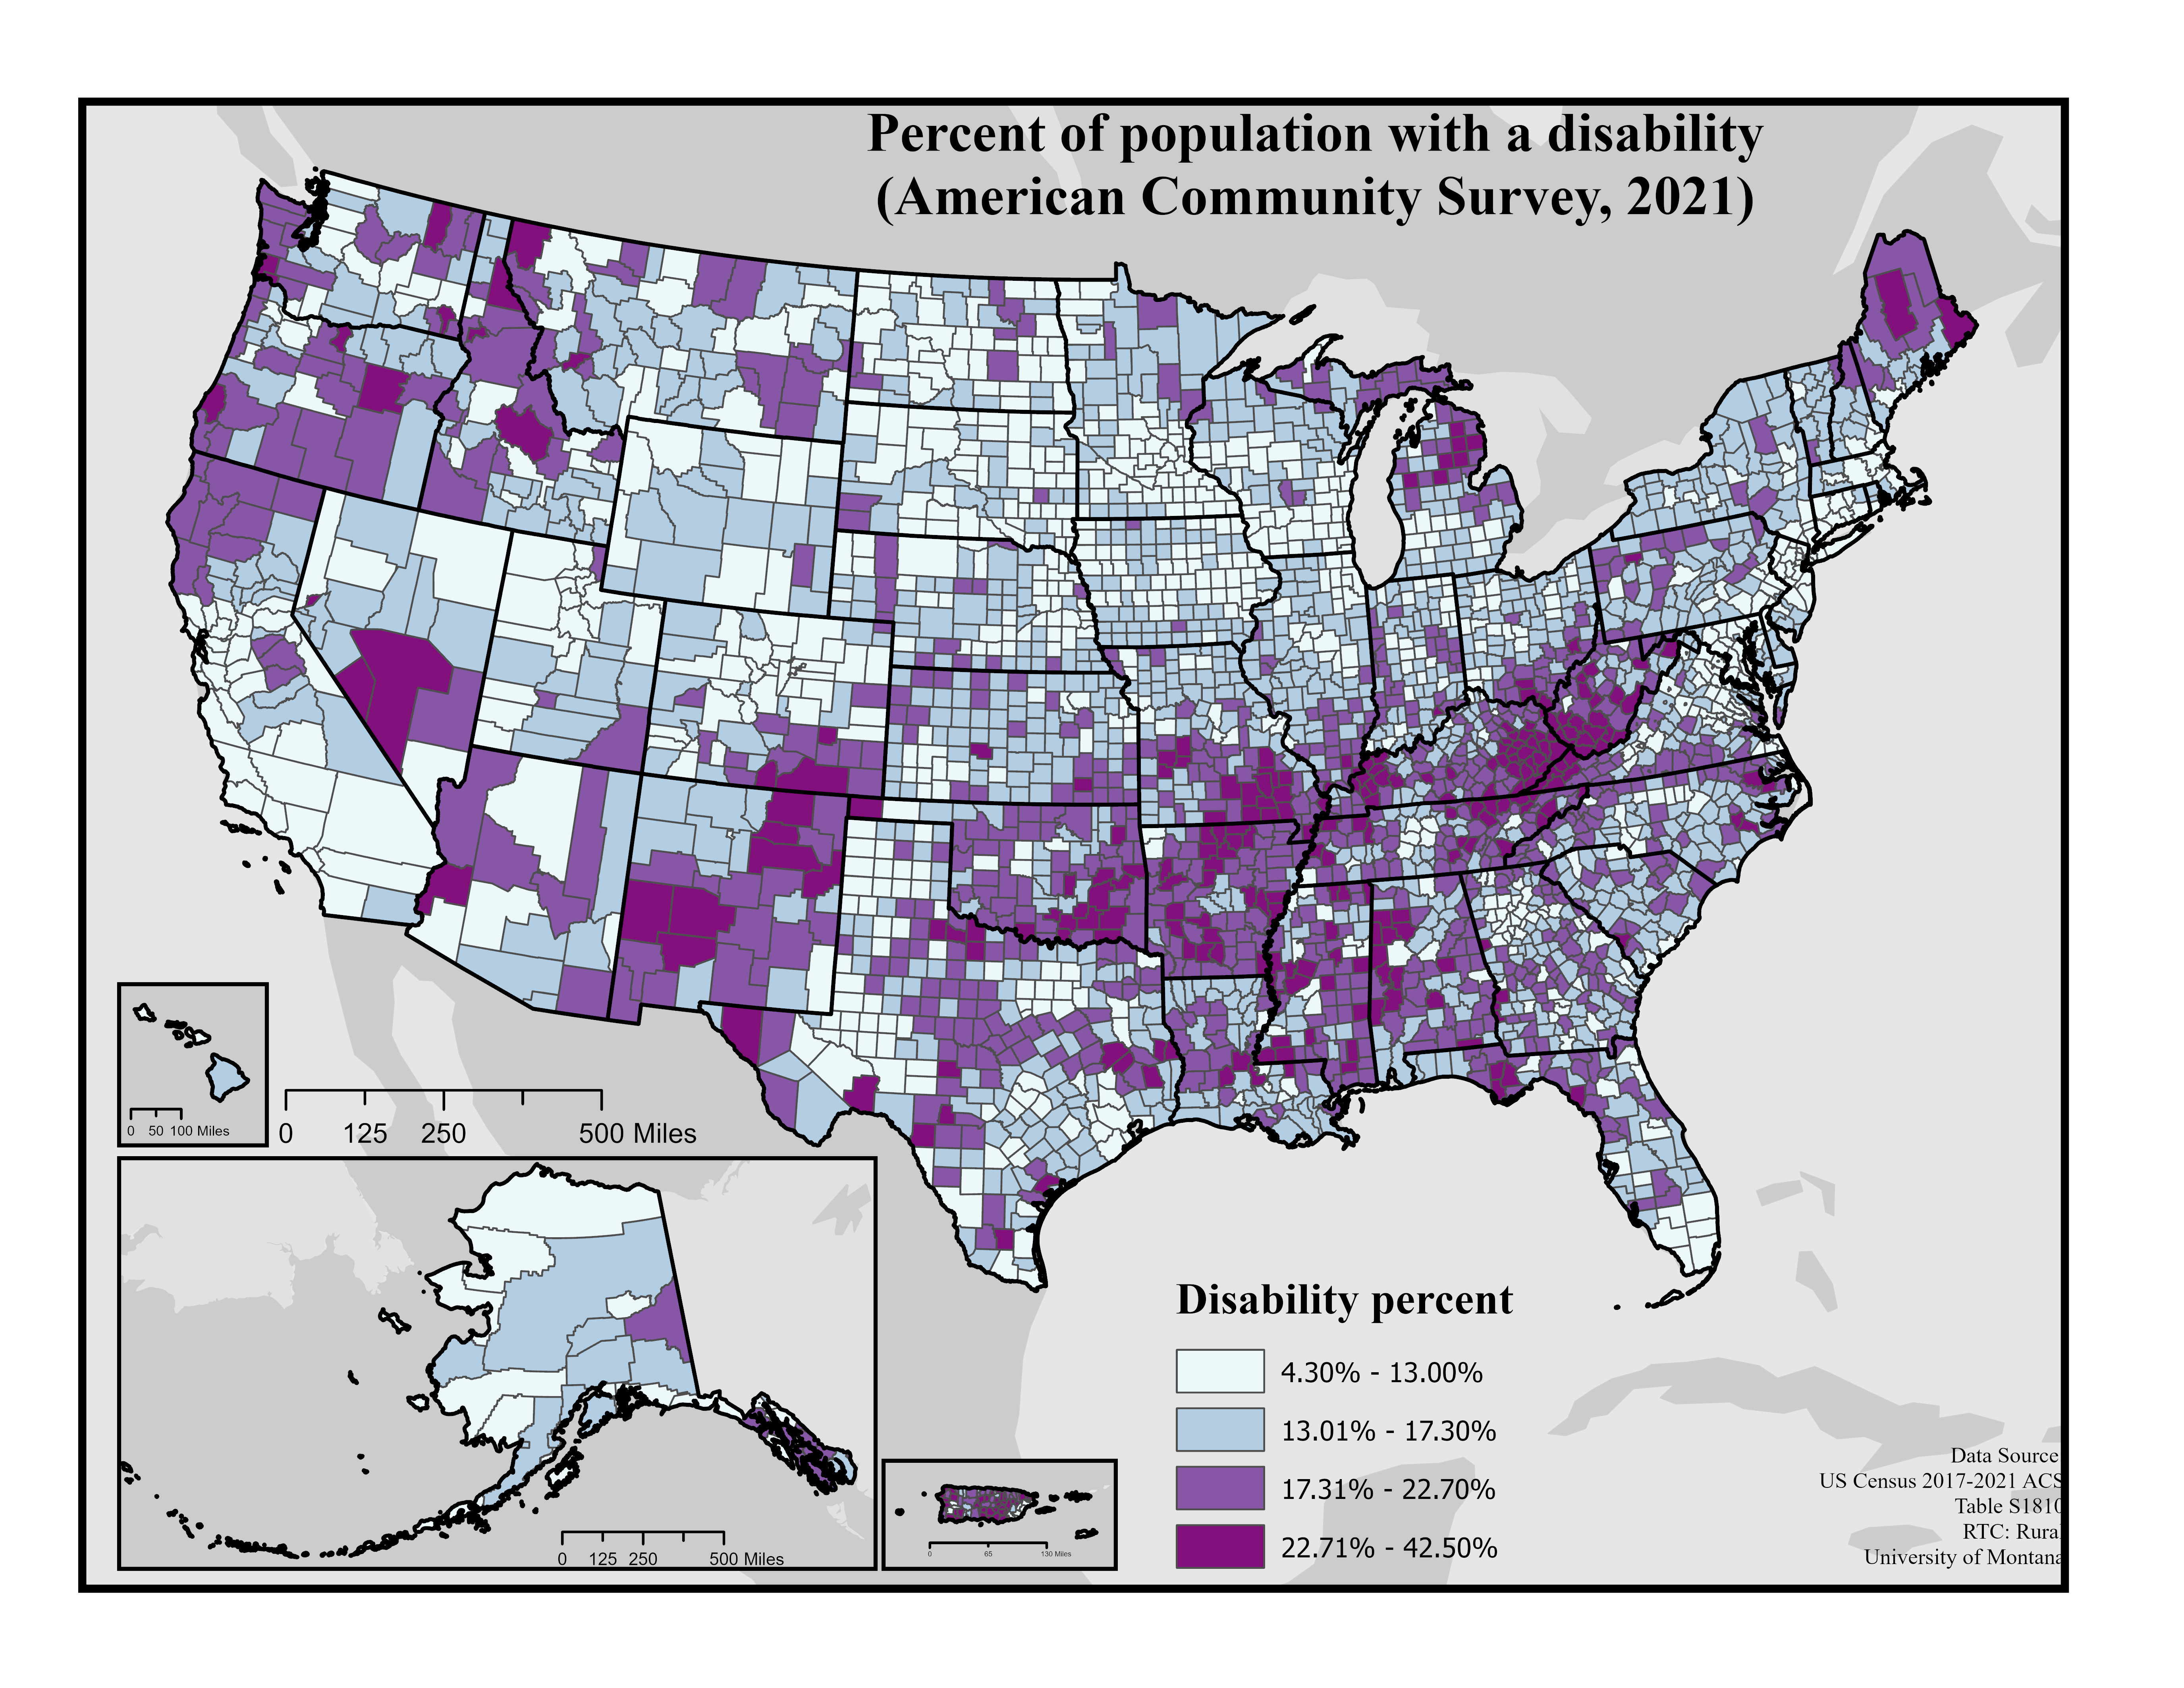 Color coded map of disability rates based on the 2021 American Community Survey.